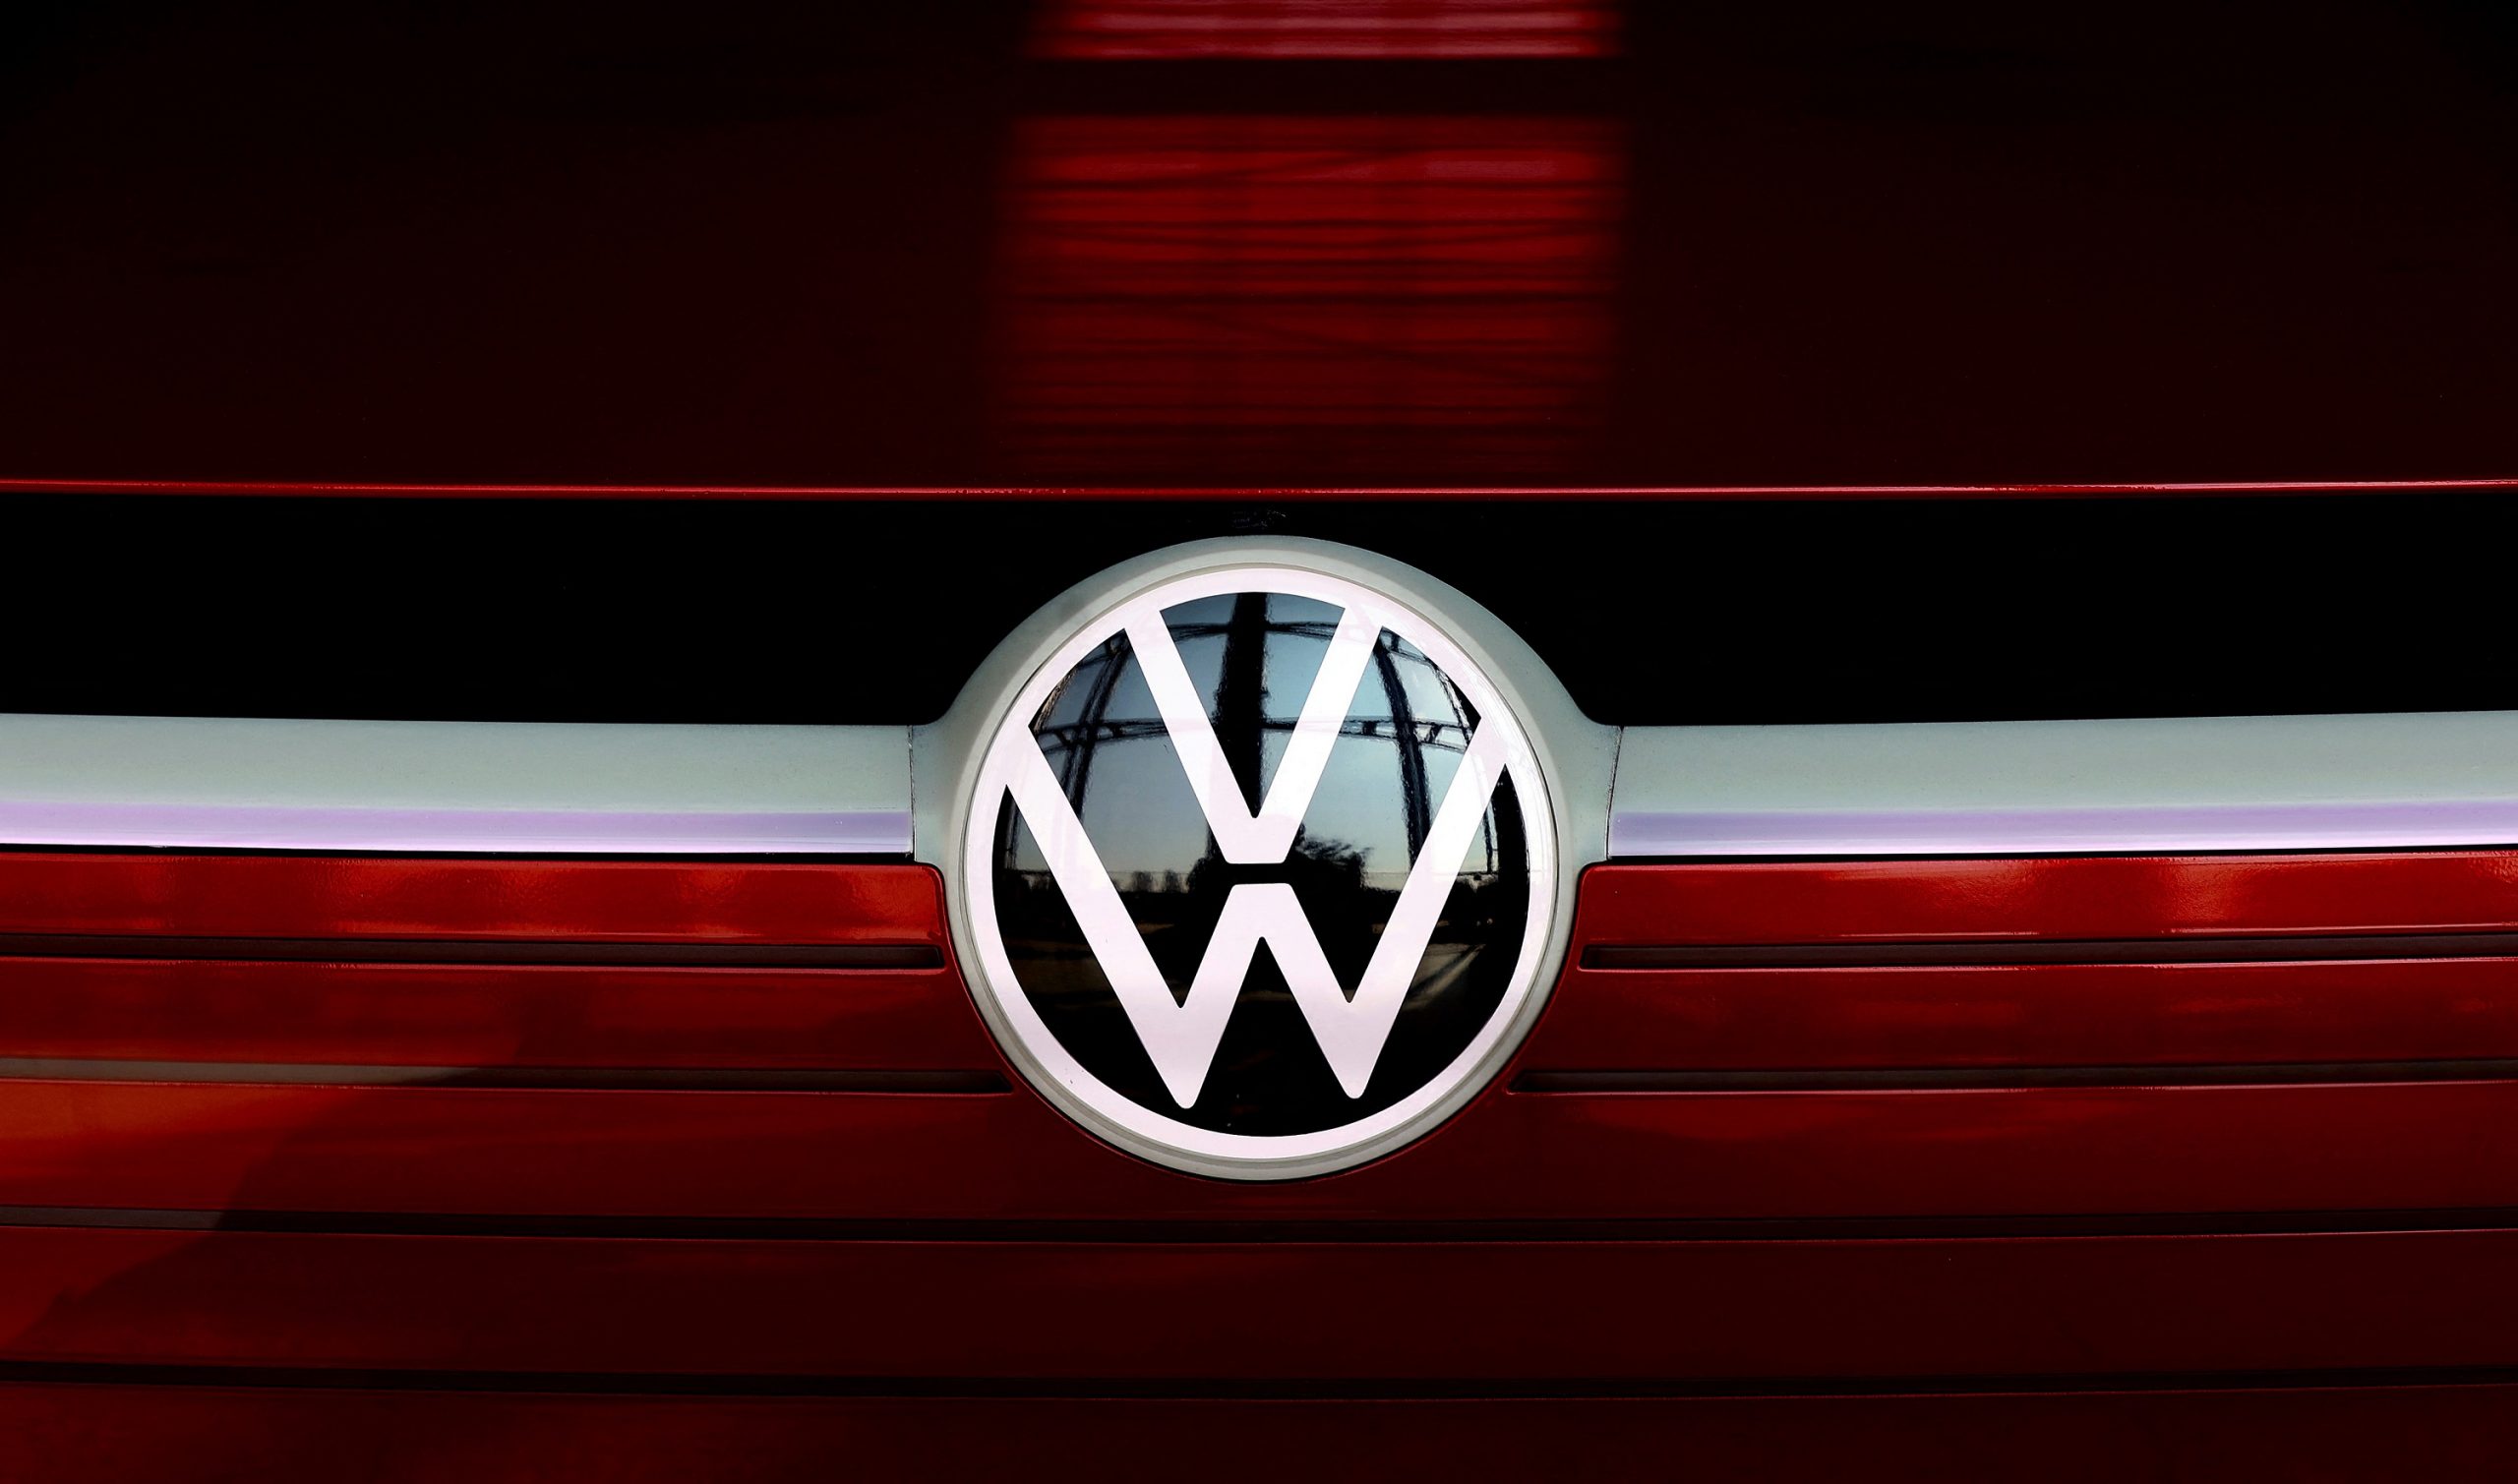 Volkswagen's logo on display at the brand's headquarters